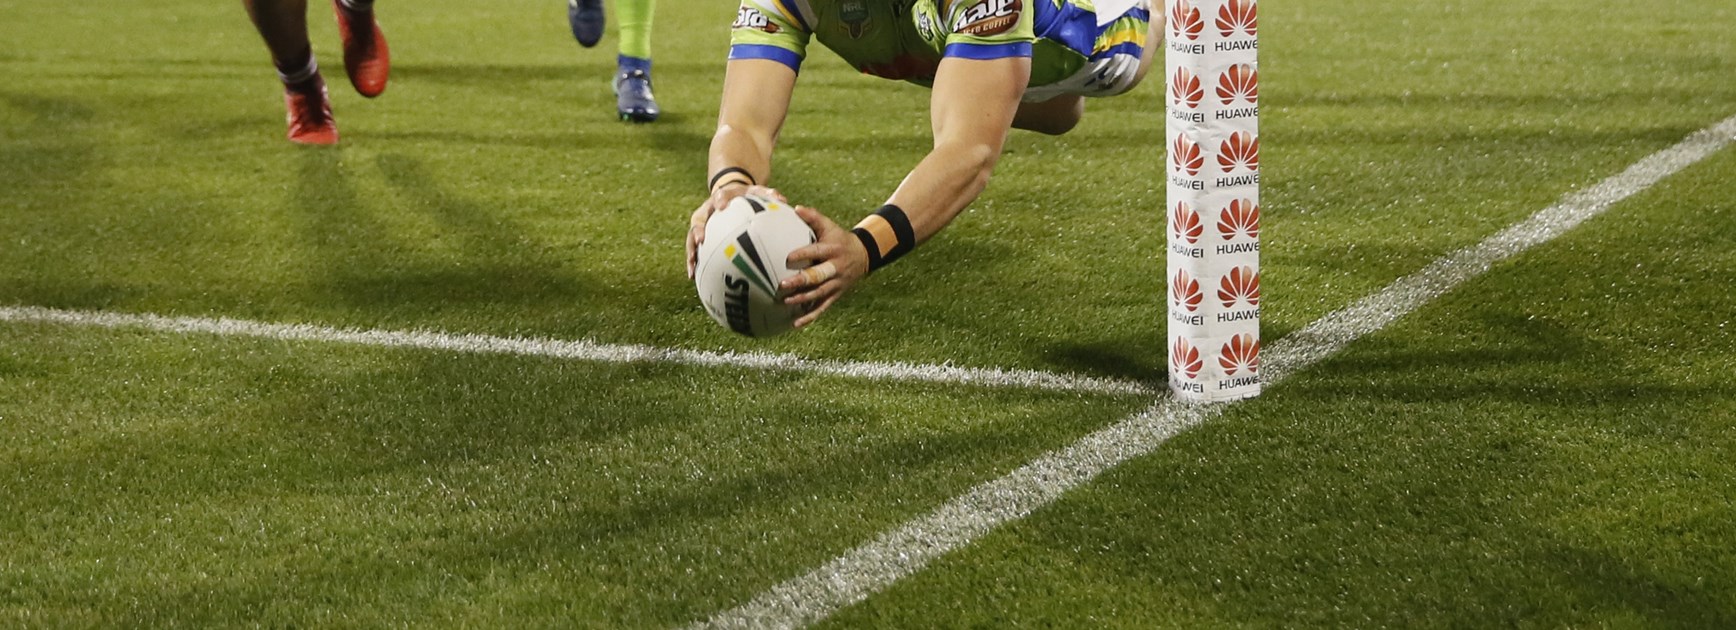 Top try-scorer of 2019: NRL.com experts have their say